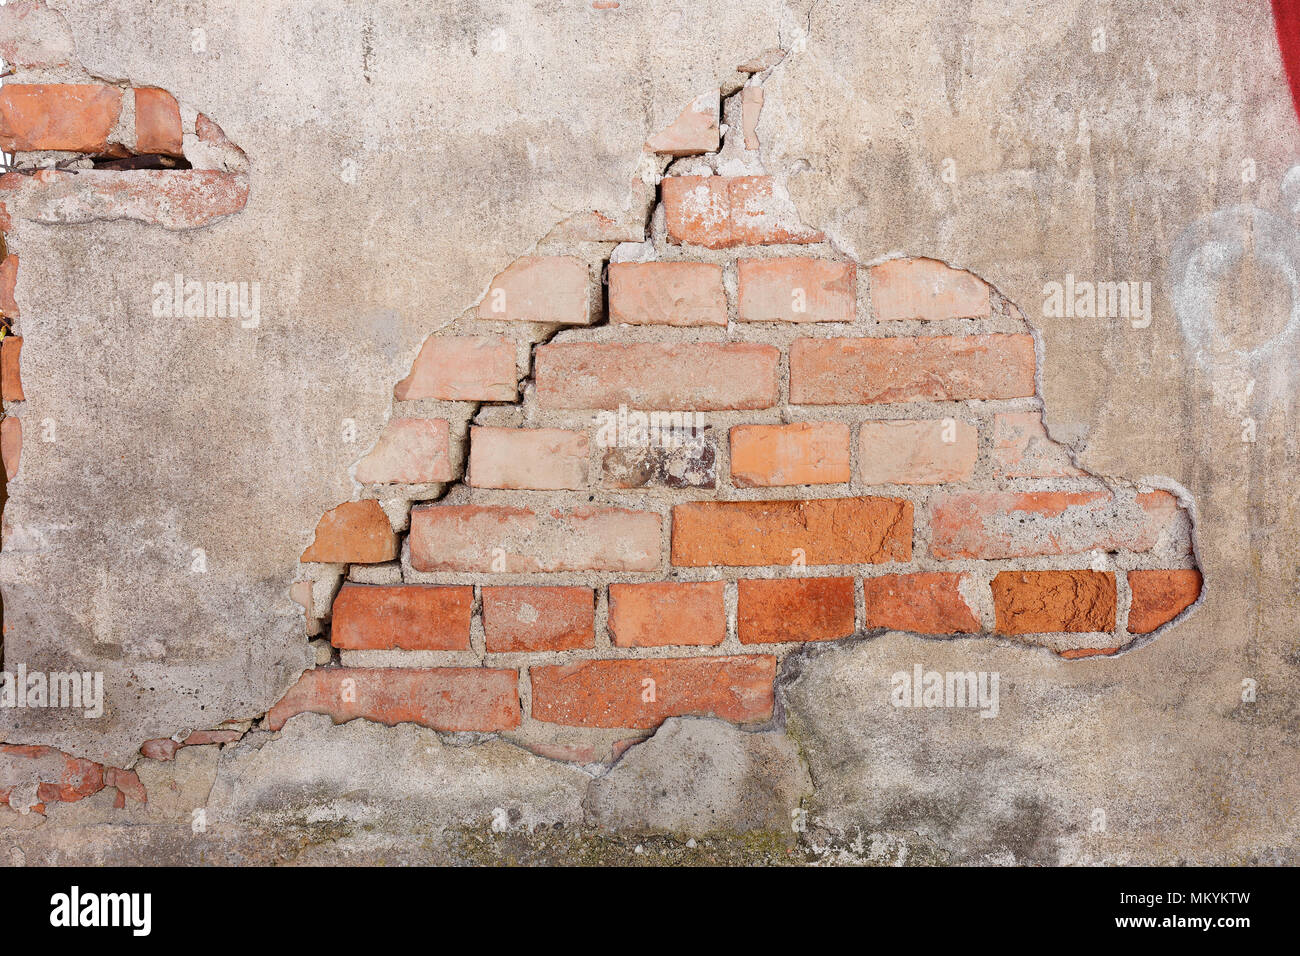 Brick wall in need of repairs with crack and damaged plaster. Stock Photo